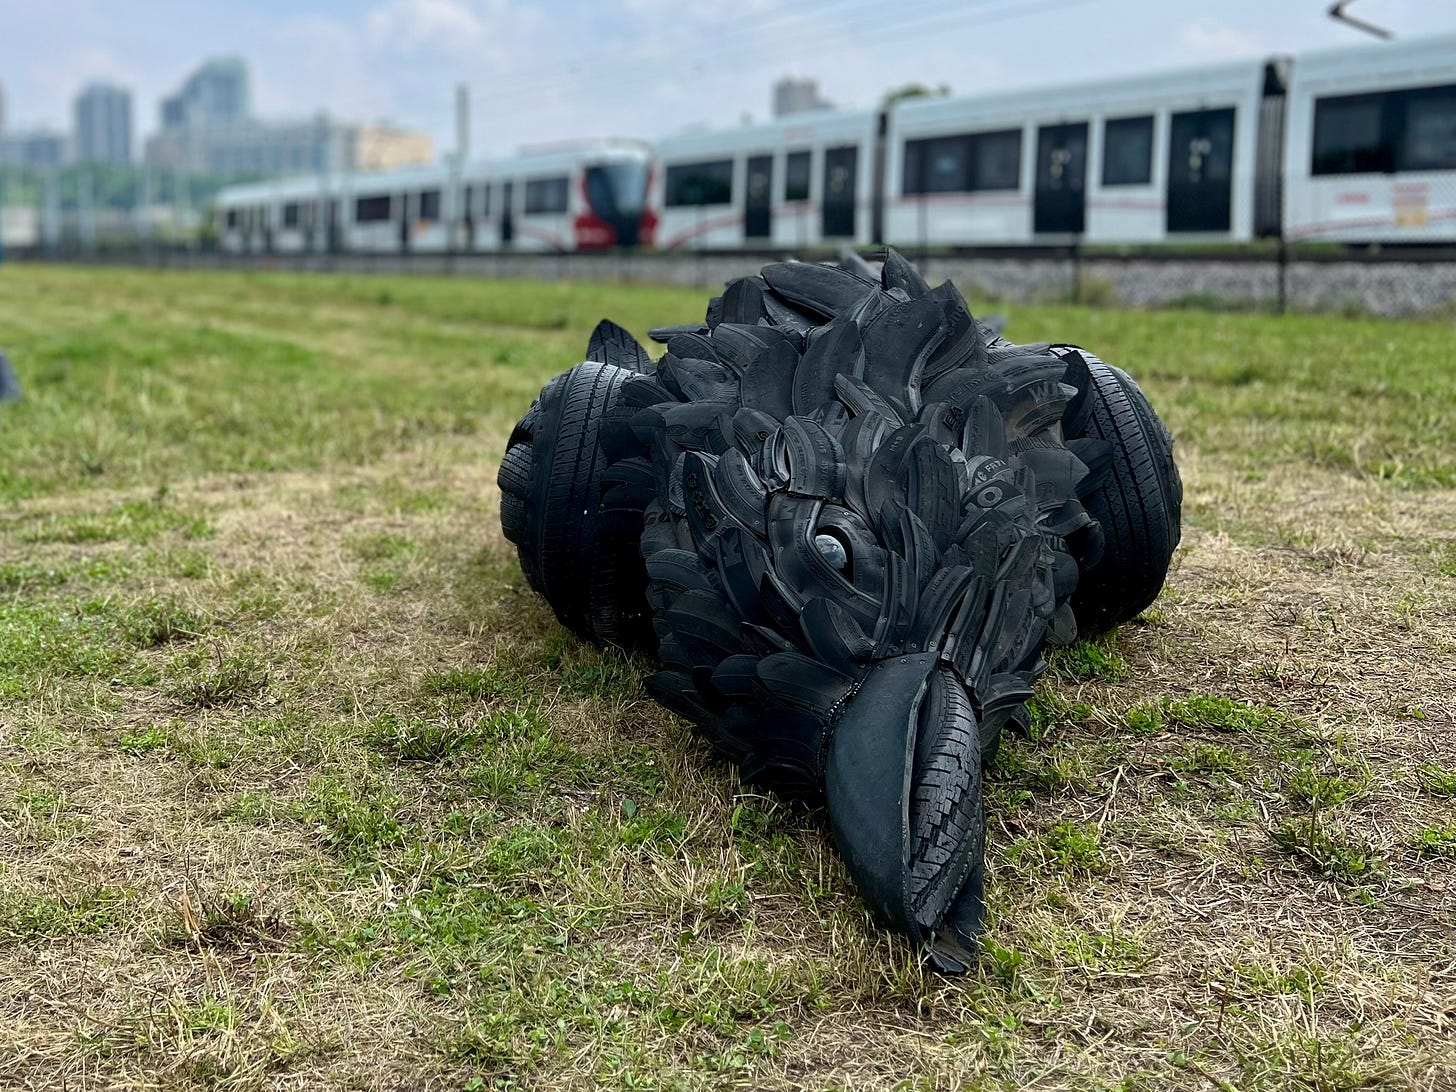 A five metre long dead crow, made of used car tires, lying on the grass with the Ottawa LRT train in the background.